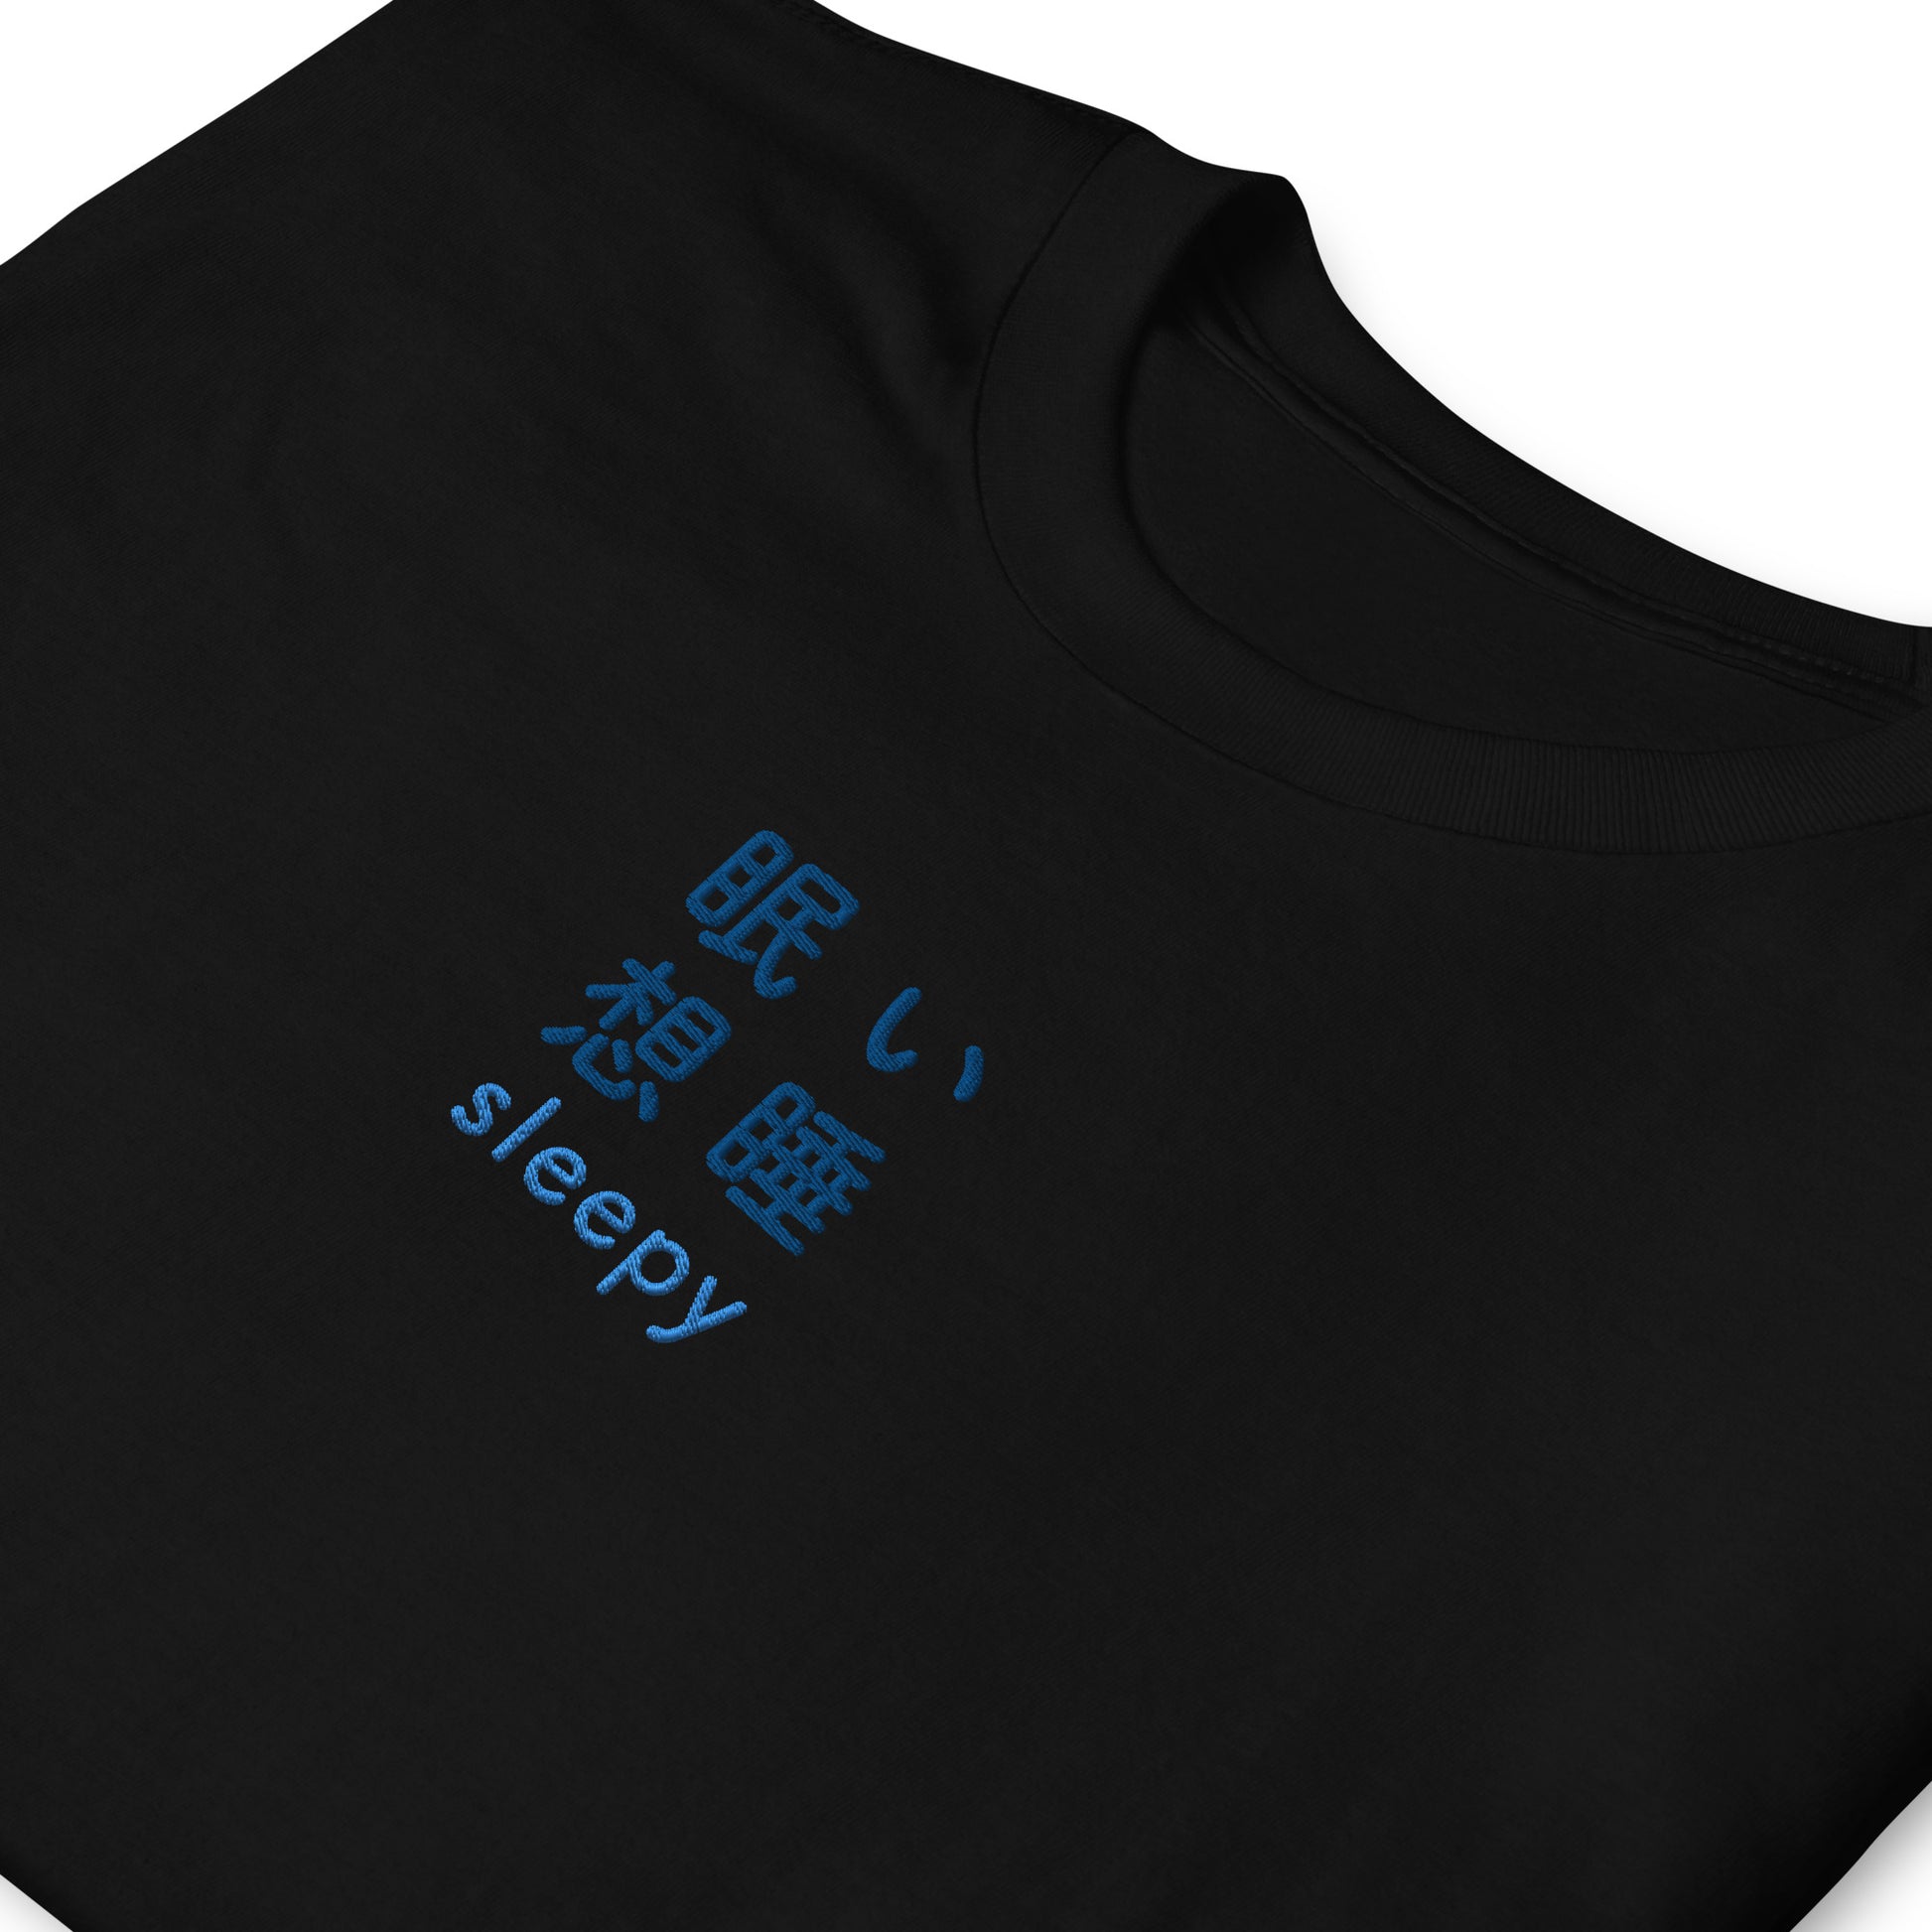 Black High Quality Tee - Front Design with an Blue Embroidery "Sleepy" in Japanese,Chinese and English